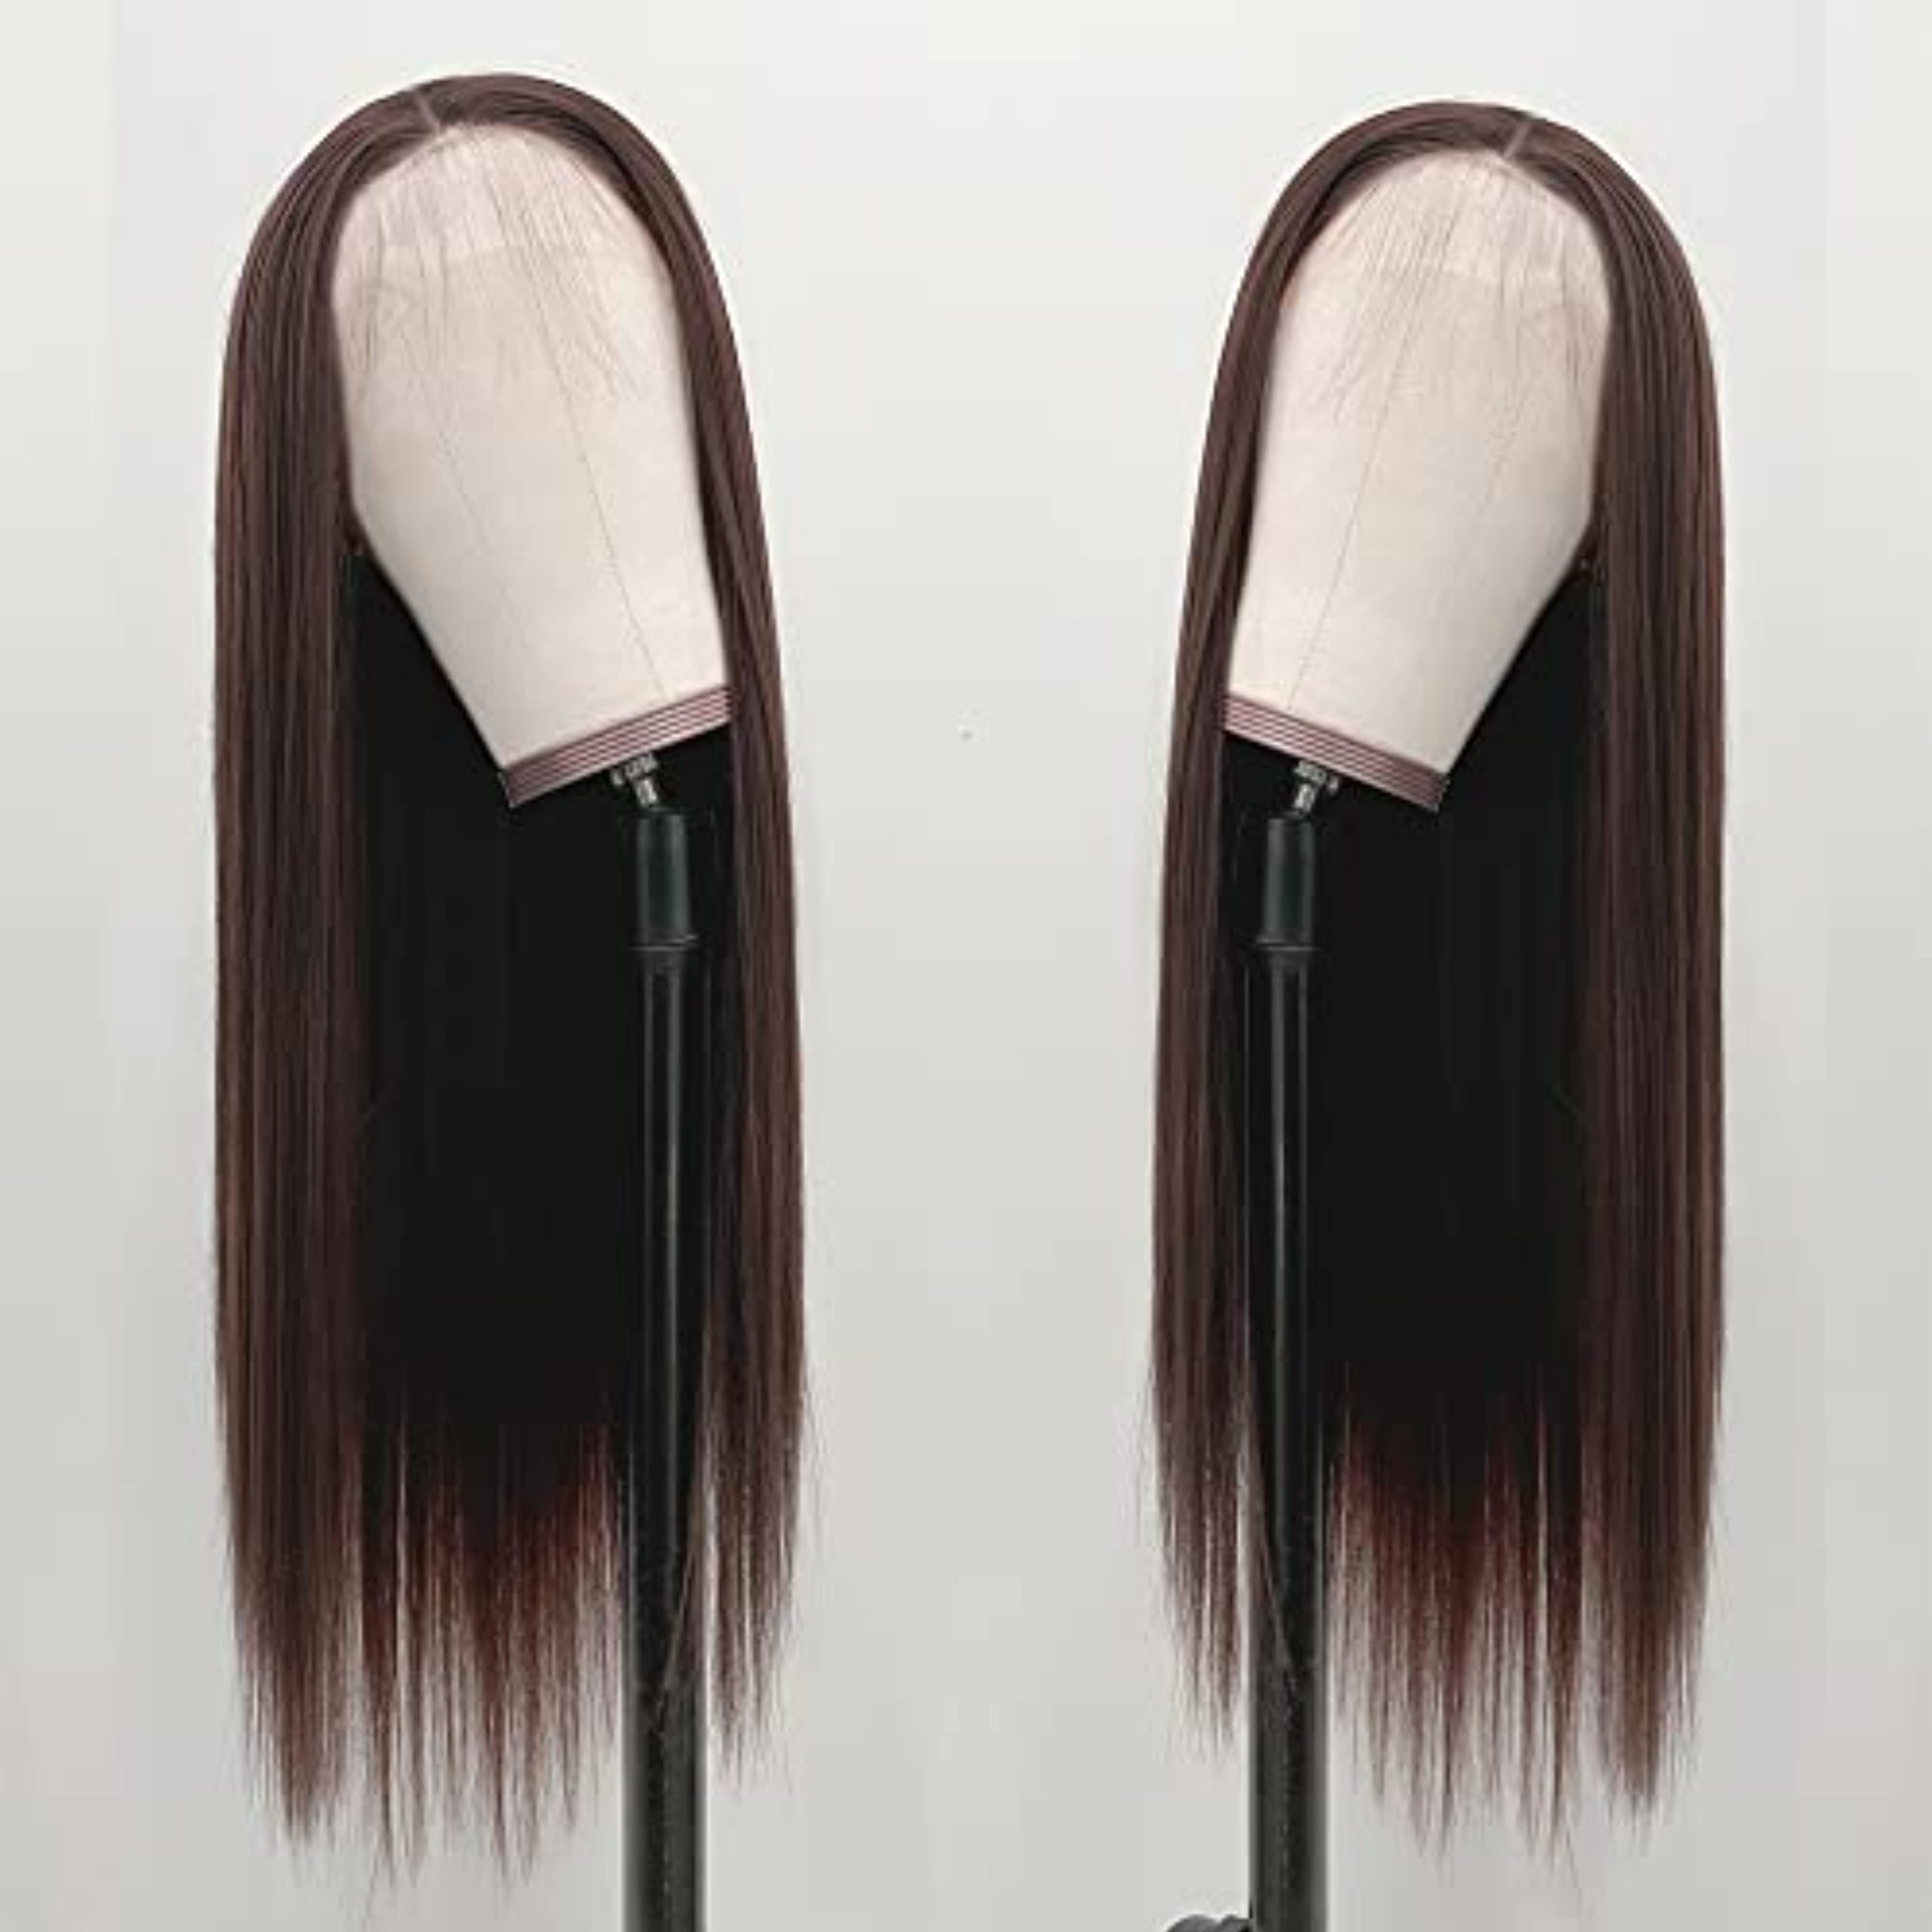 13×3 Synthetic Lace Front Wigs (1)